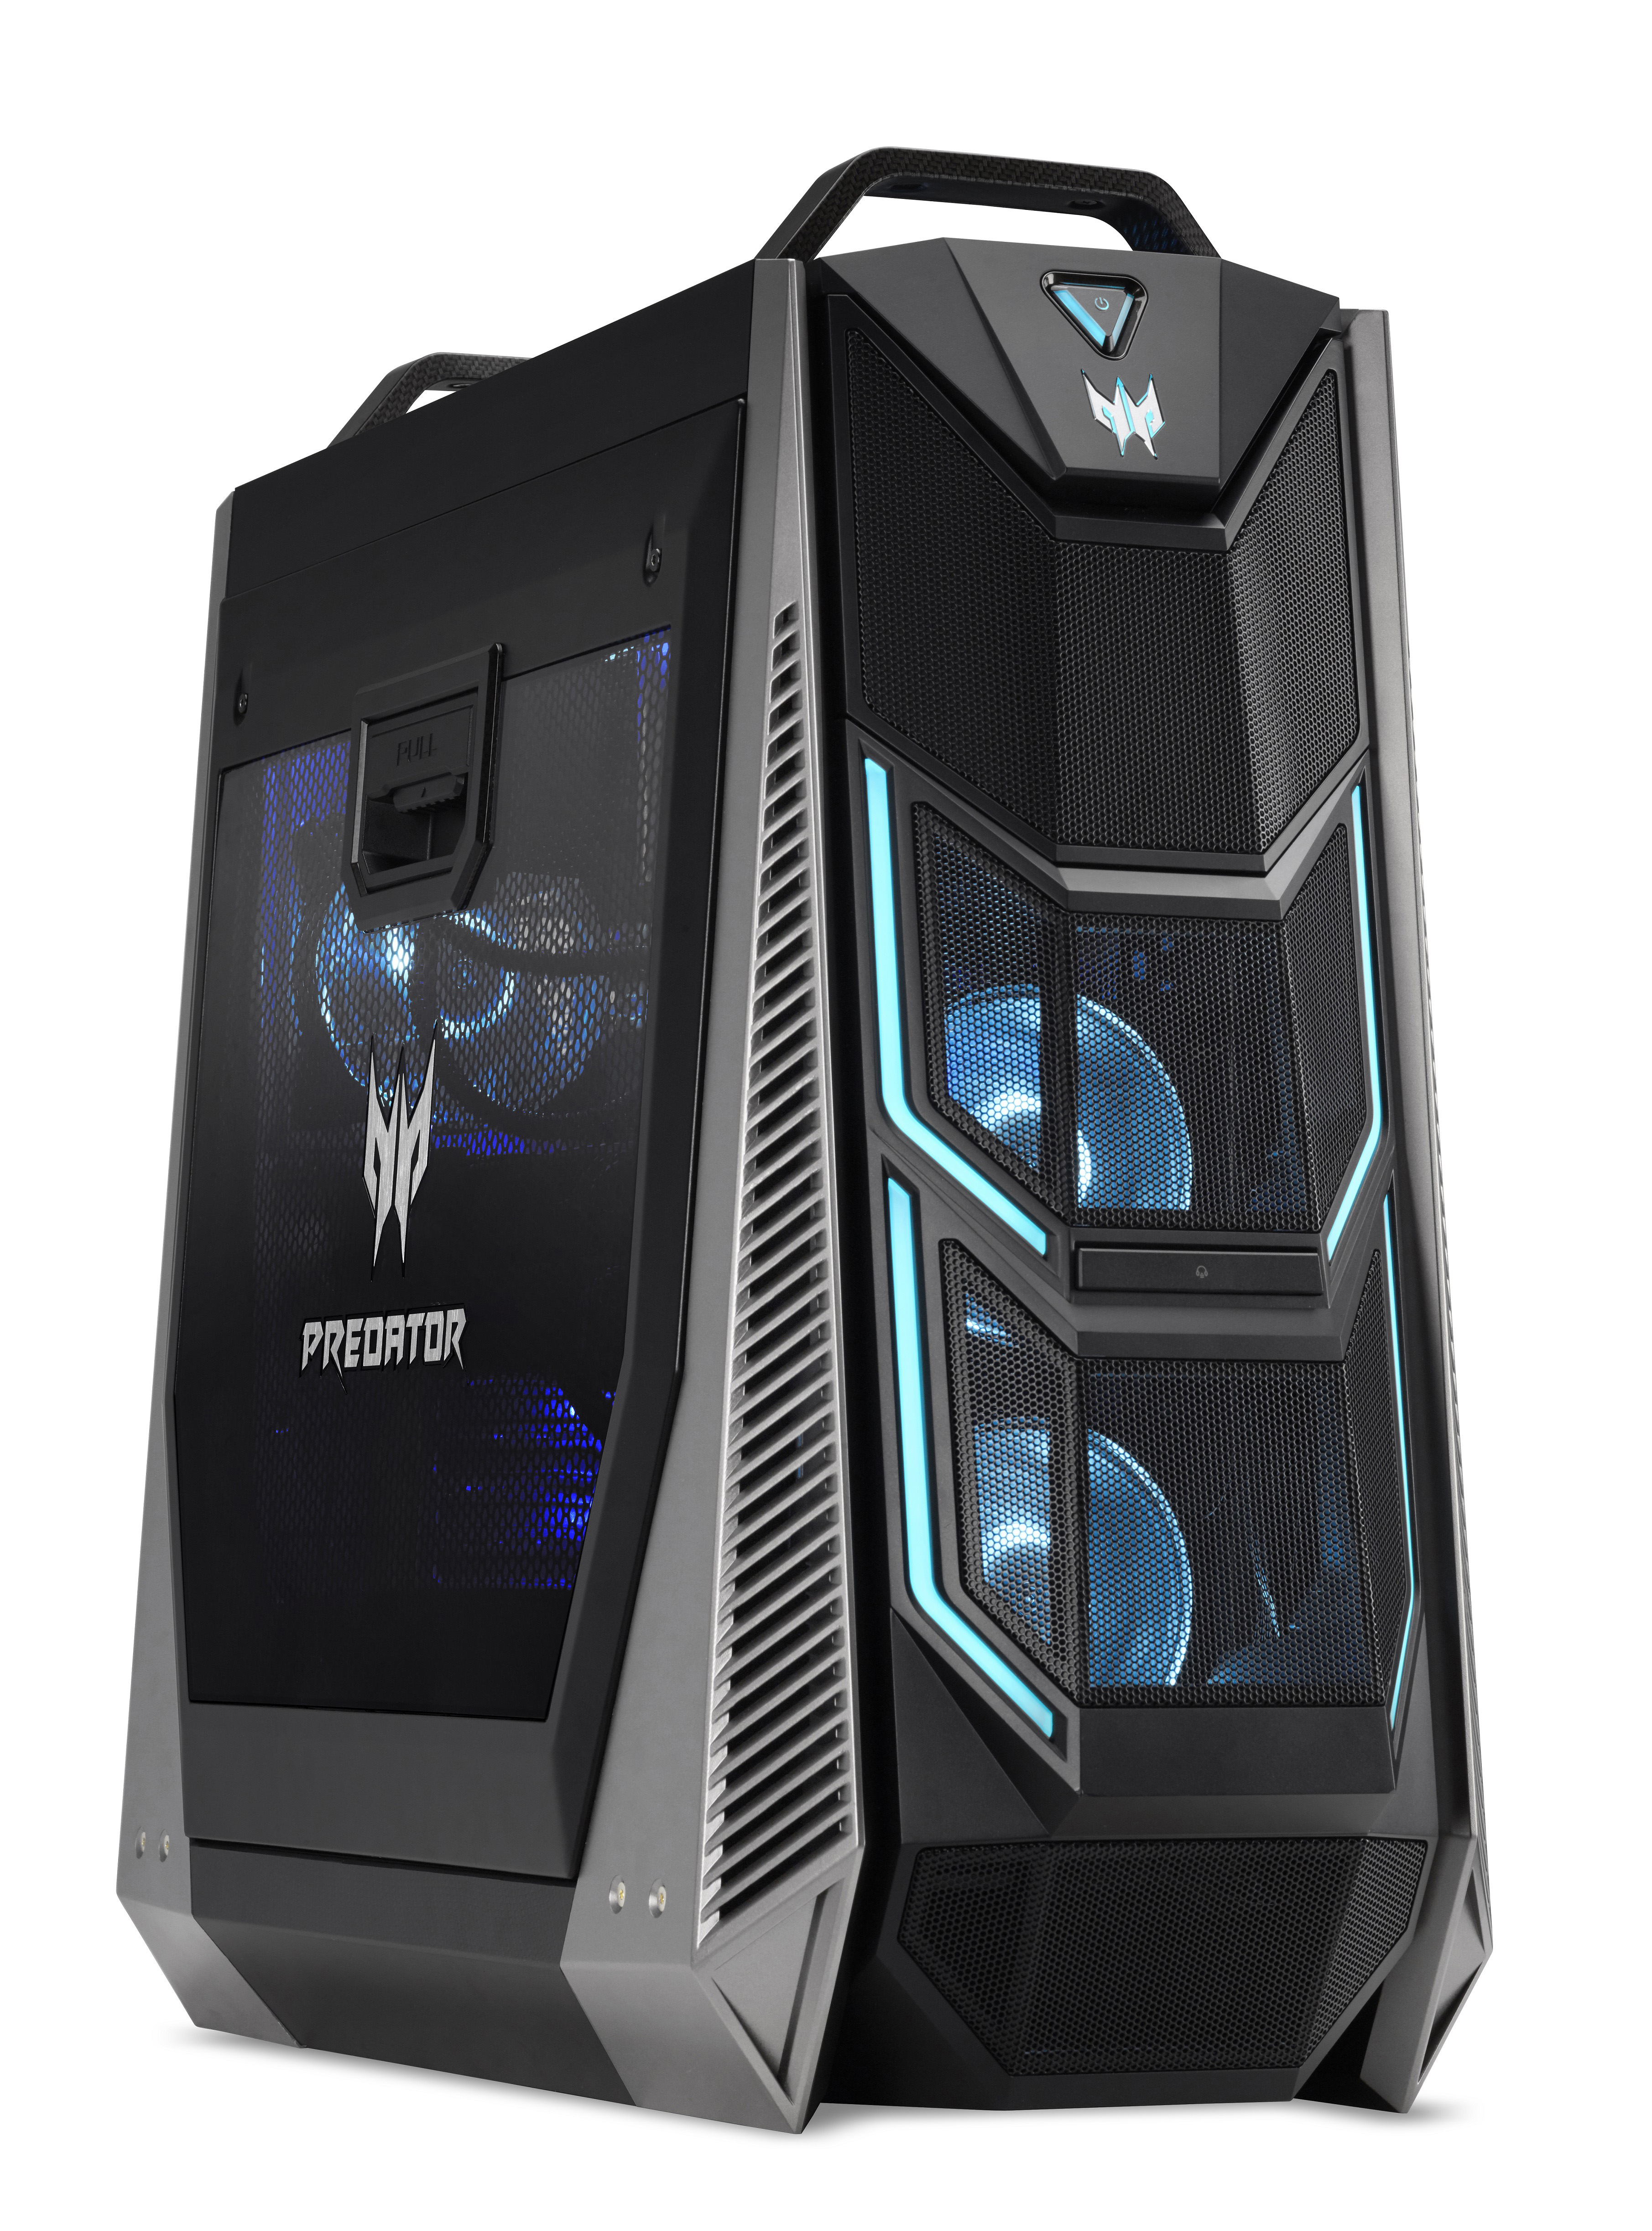 The Acer Predator Orion 9000 series gaming desktops are cool inside and out, designed with commanding aesthetics and advanced thermals.